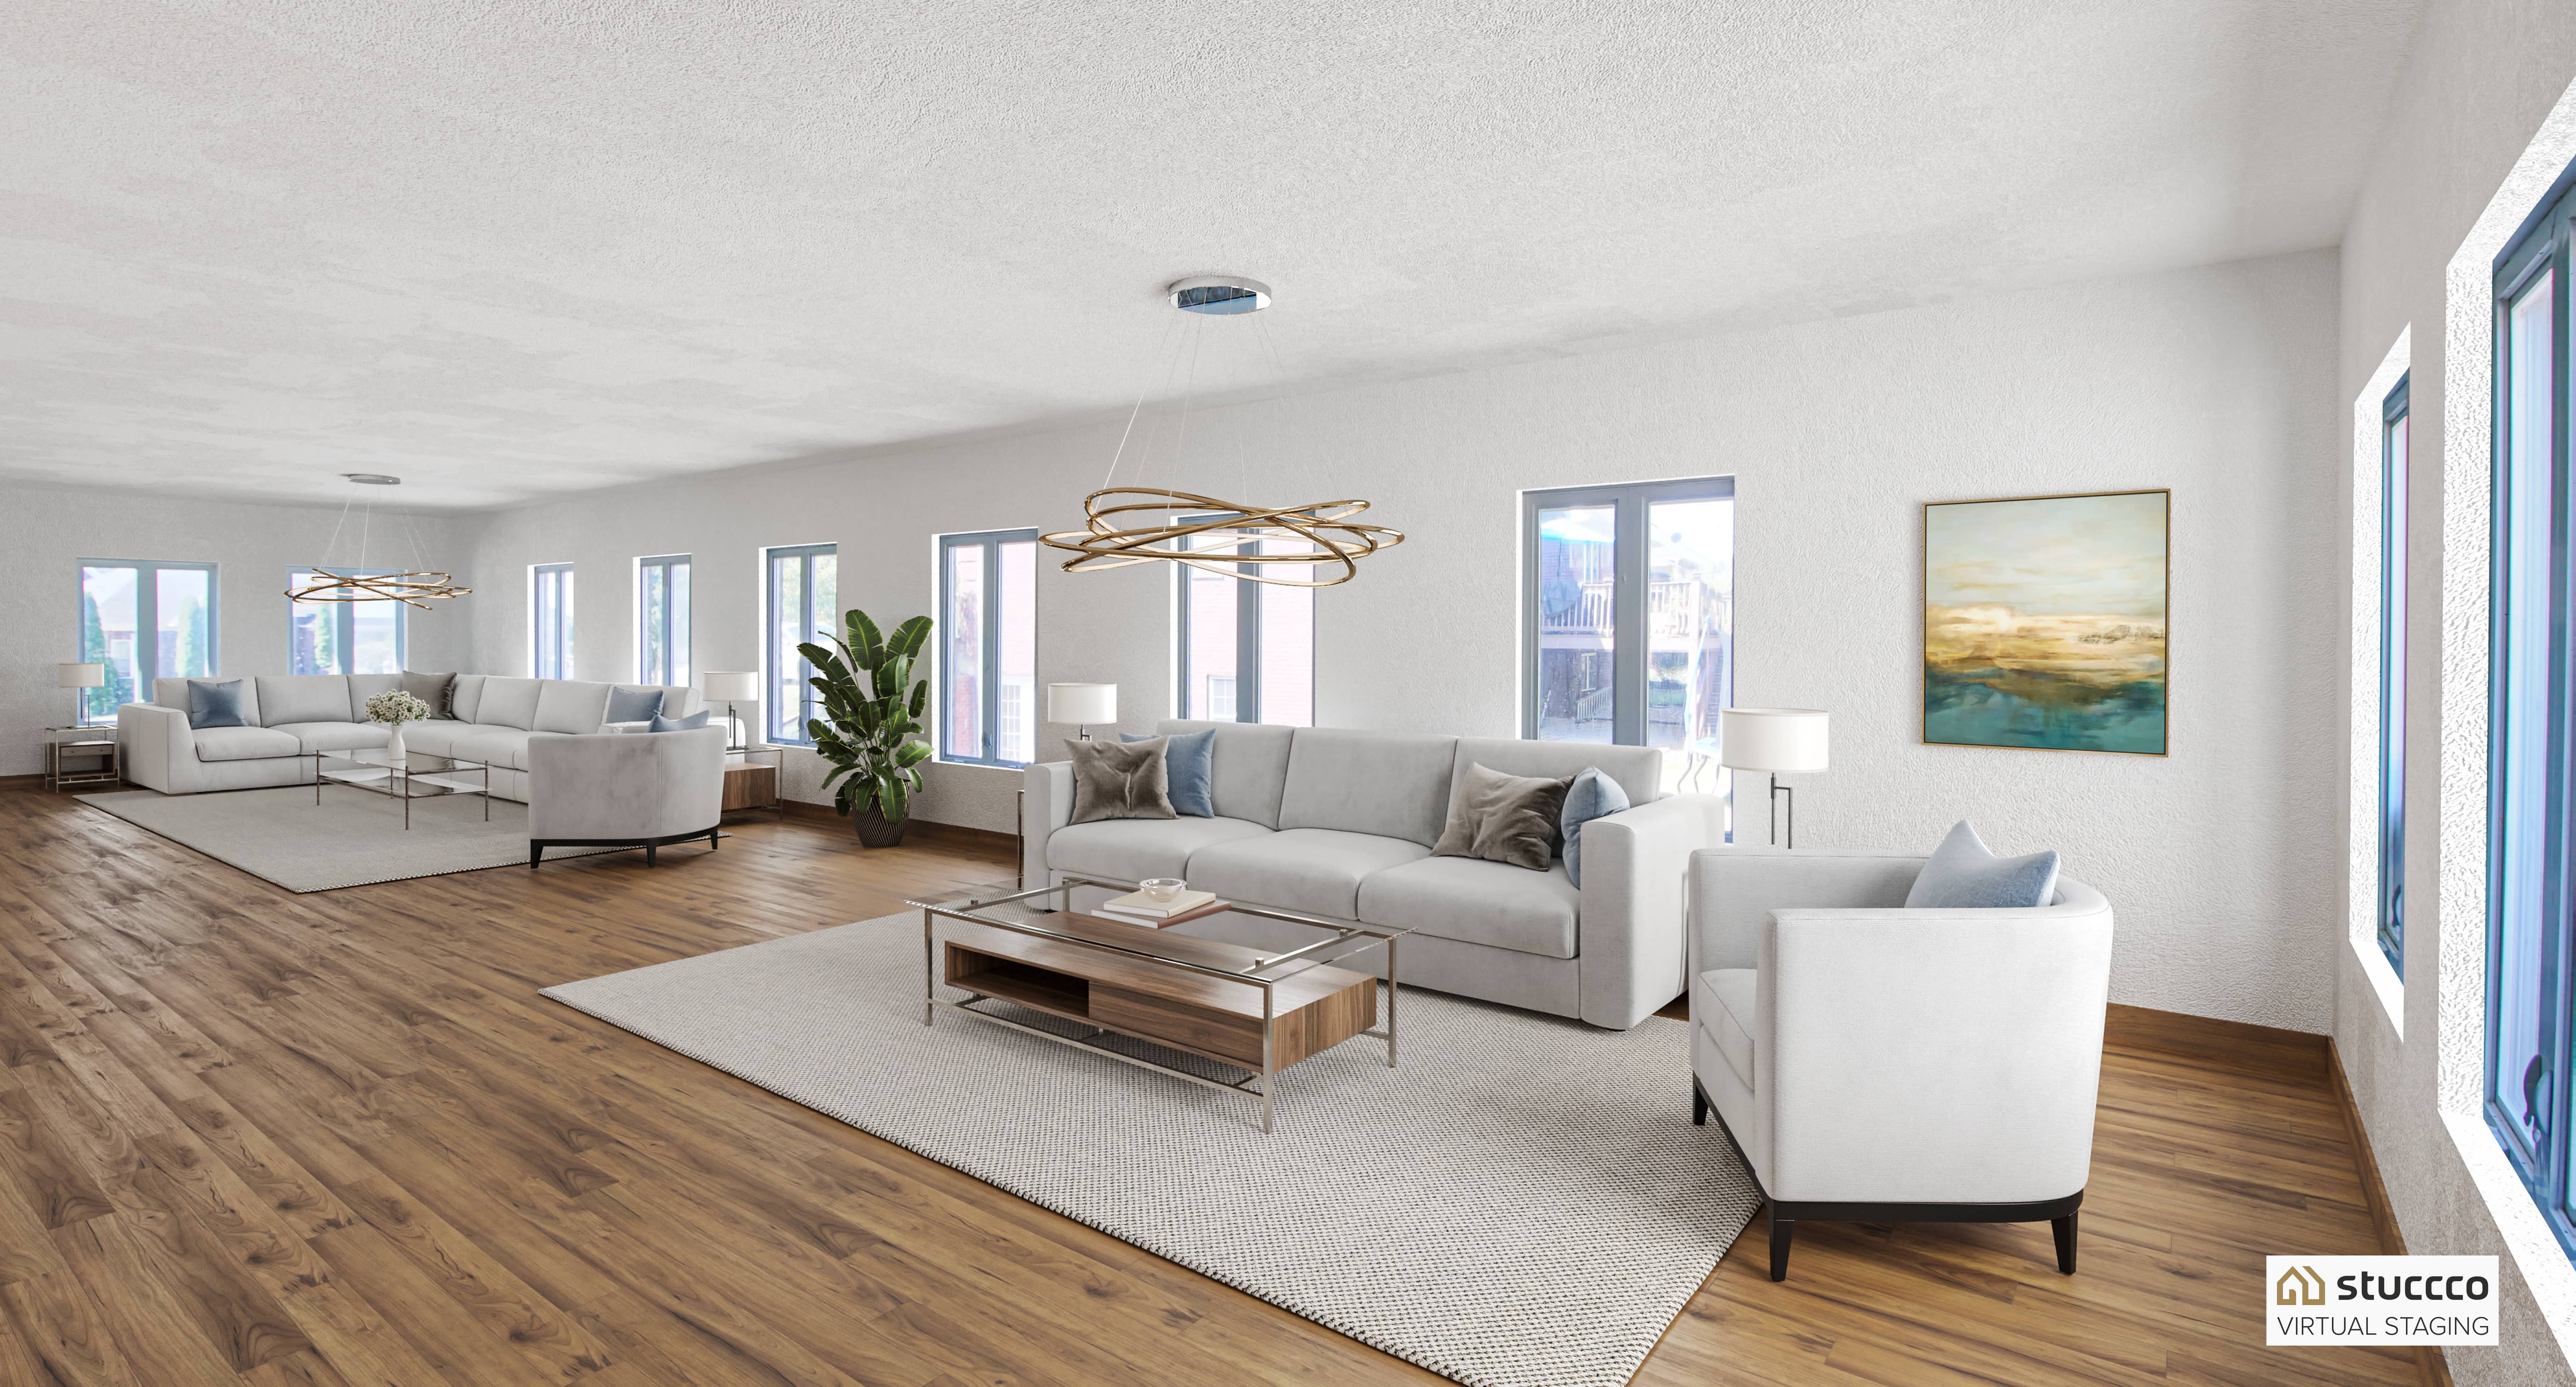 Stuccco virtual staging example from construction